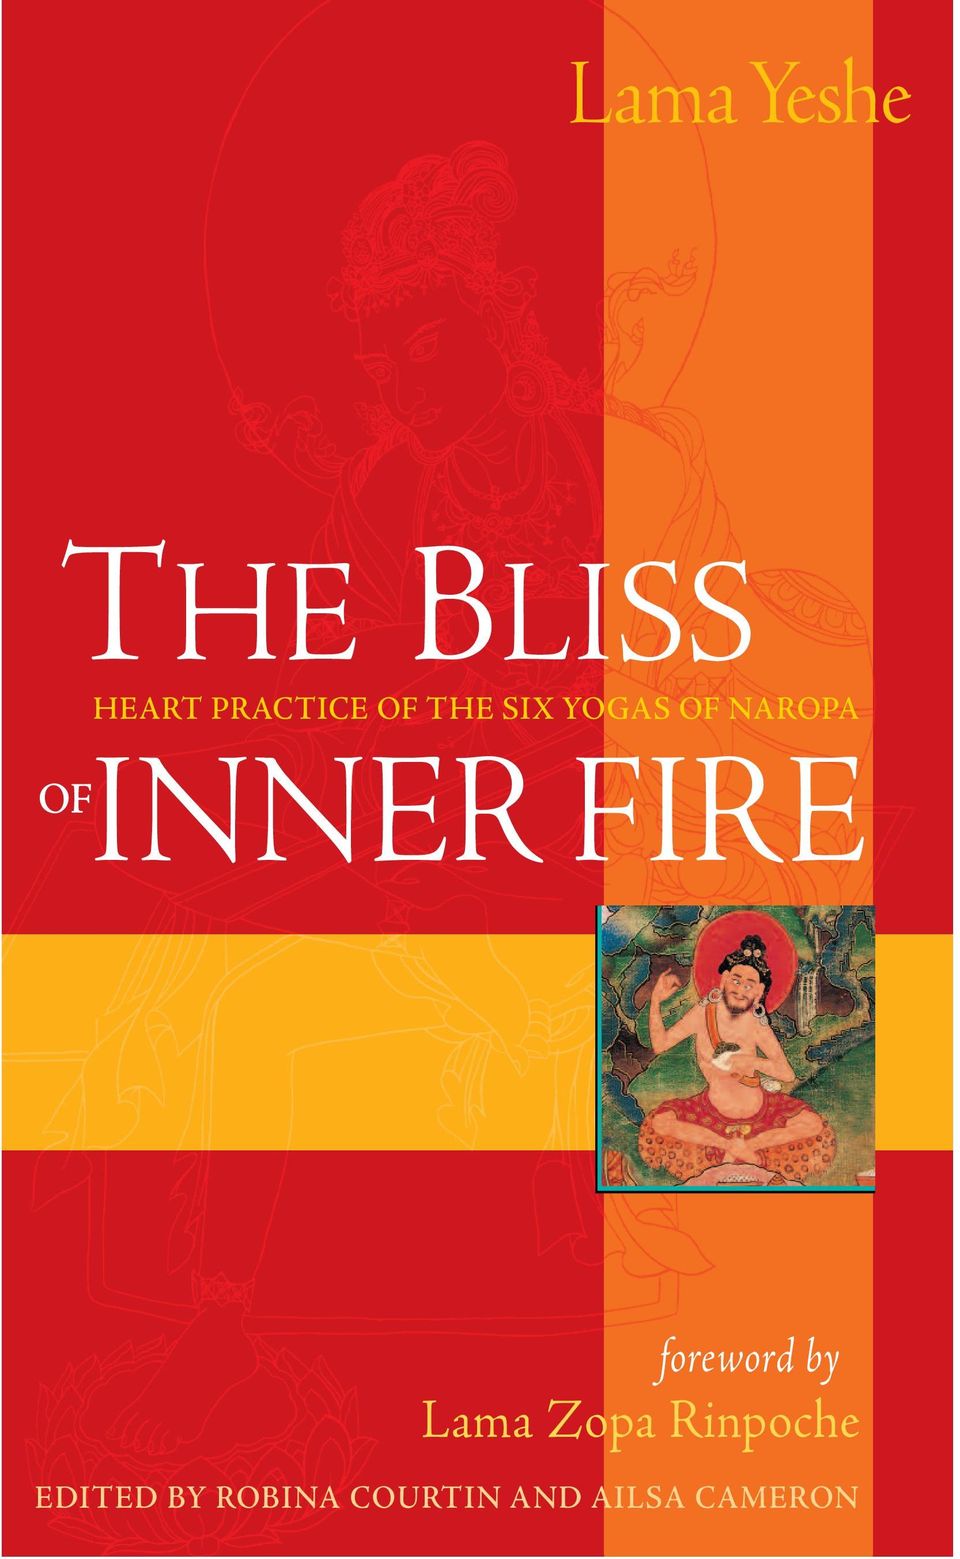 FIRE foreword by Lama Zopa Rinpoche